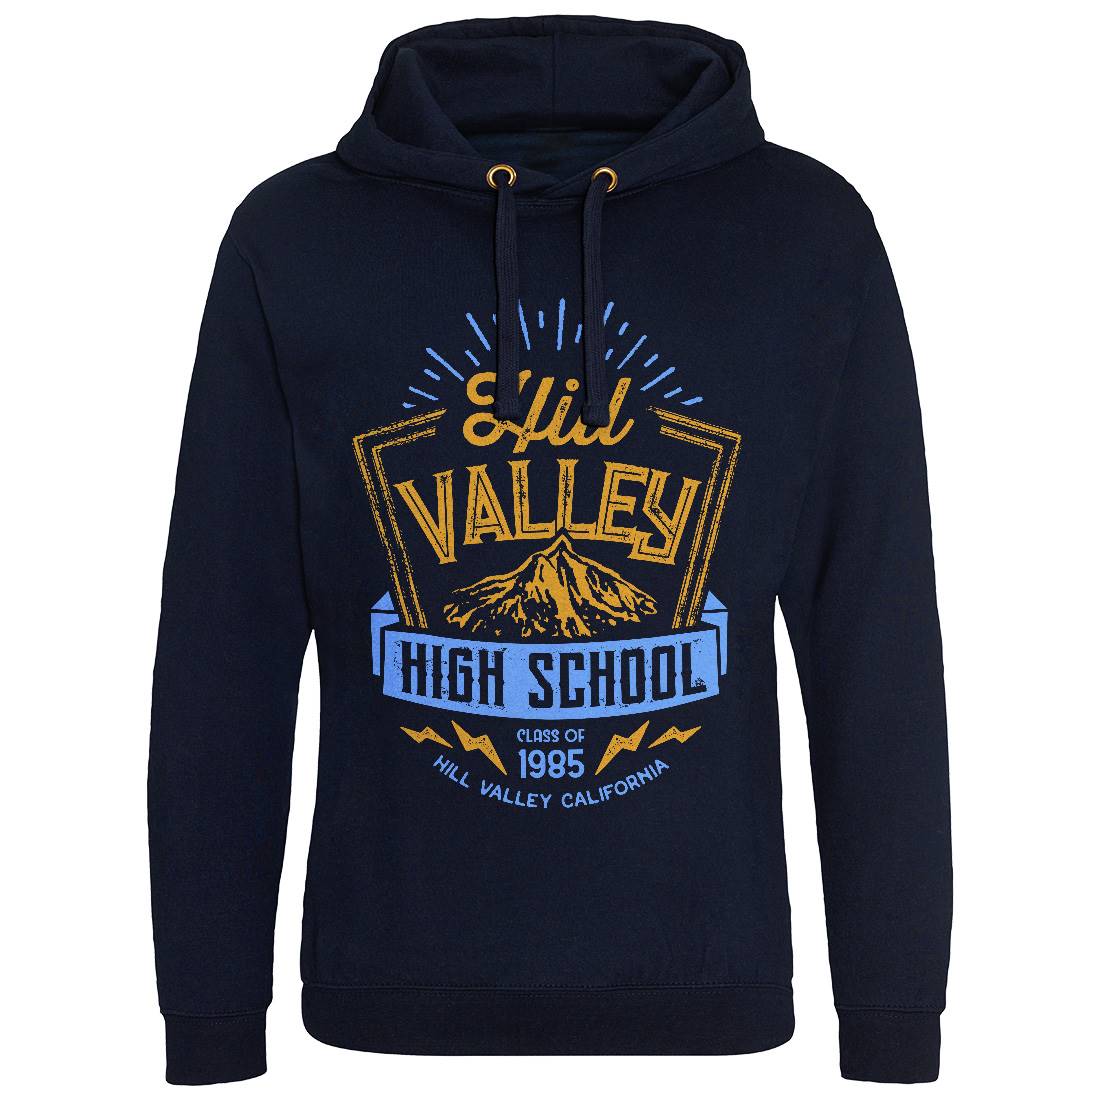 Hill Valley Mens Hoodie Without Pocket Space D432